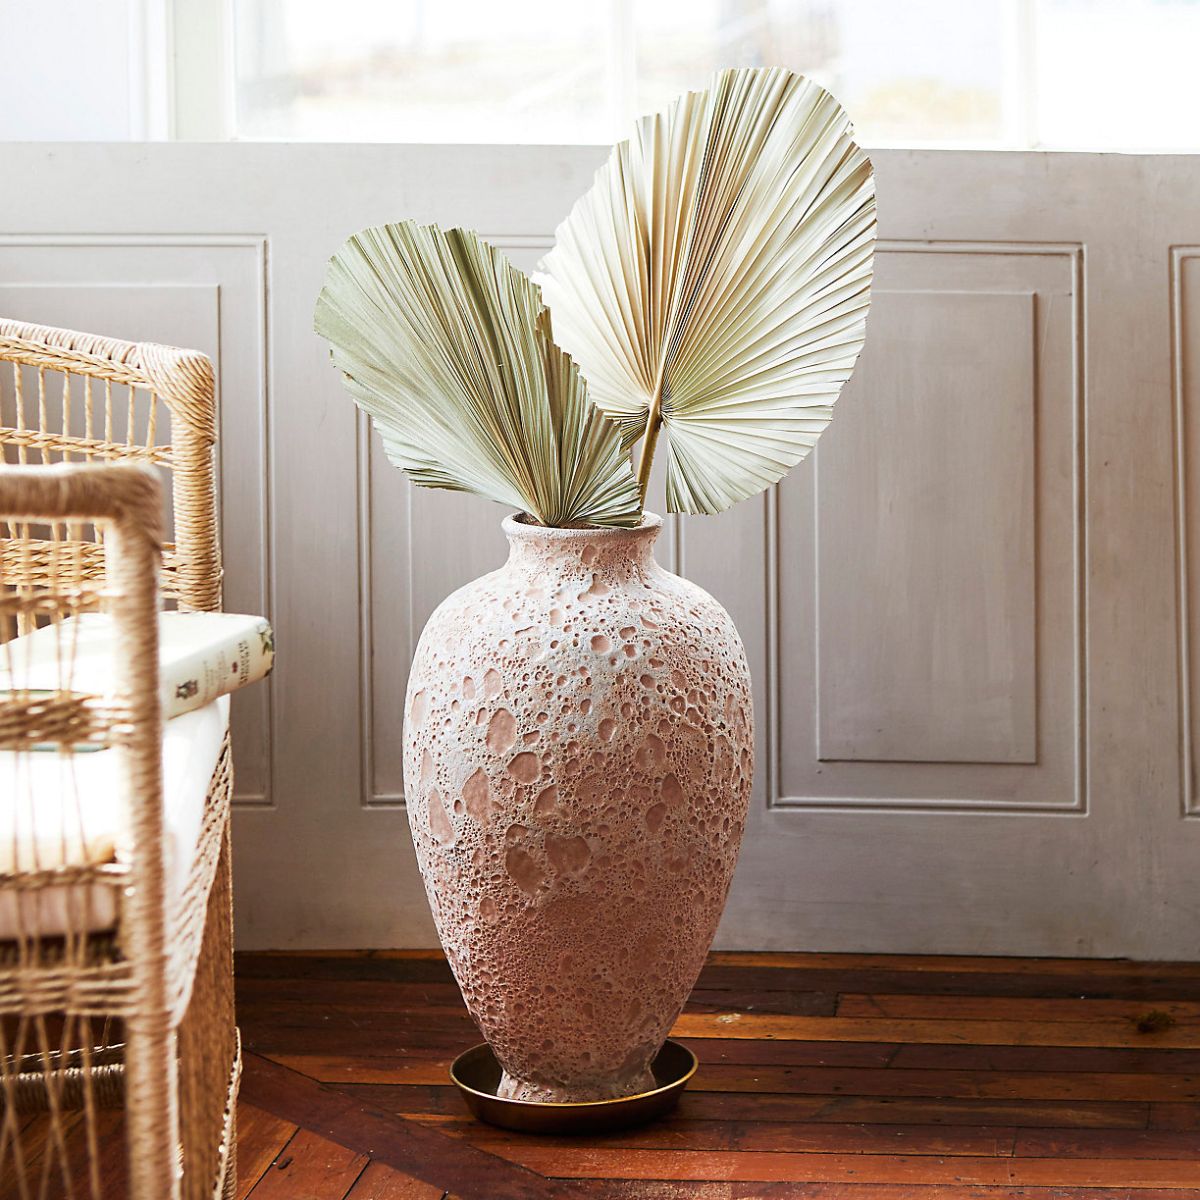 earthenware floor vase show indoors with dried leaves vase has textured markings from terrain